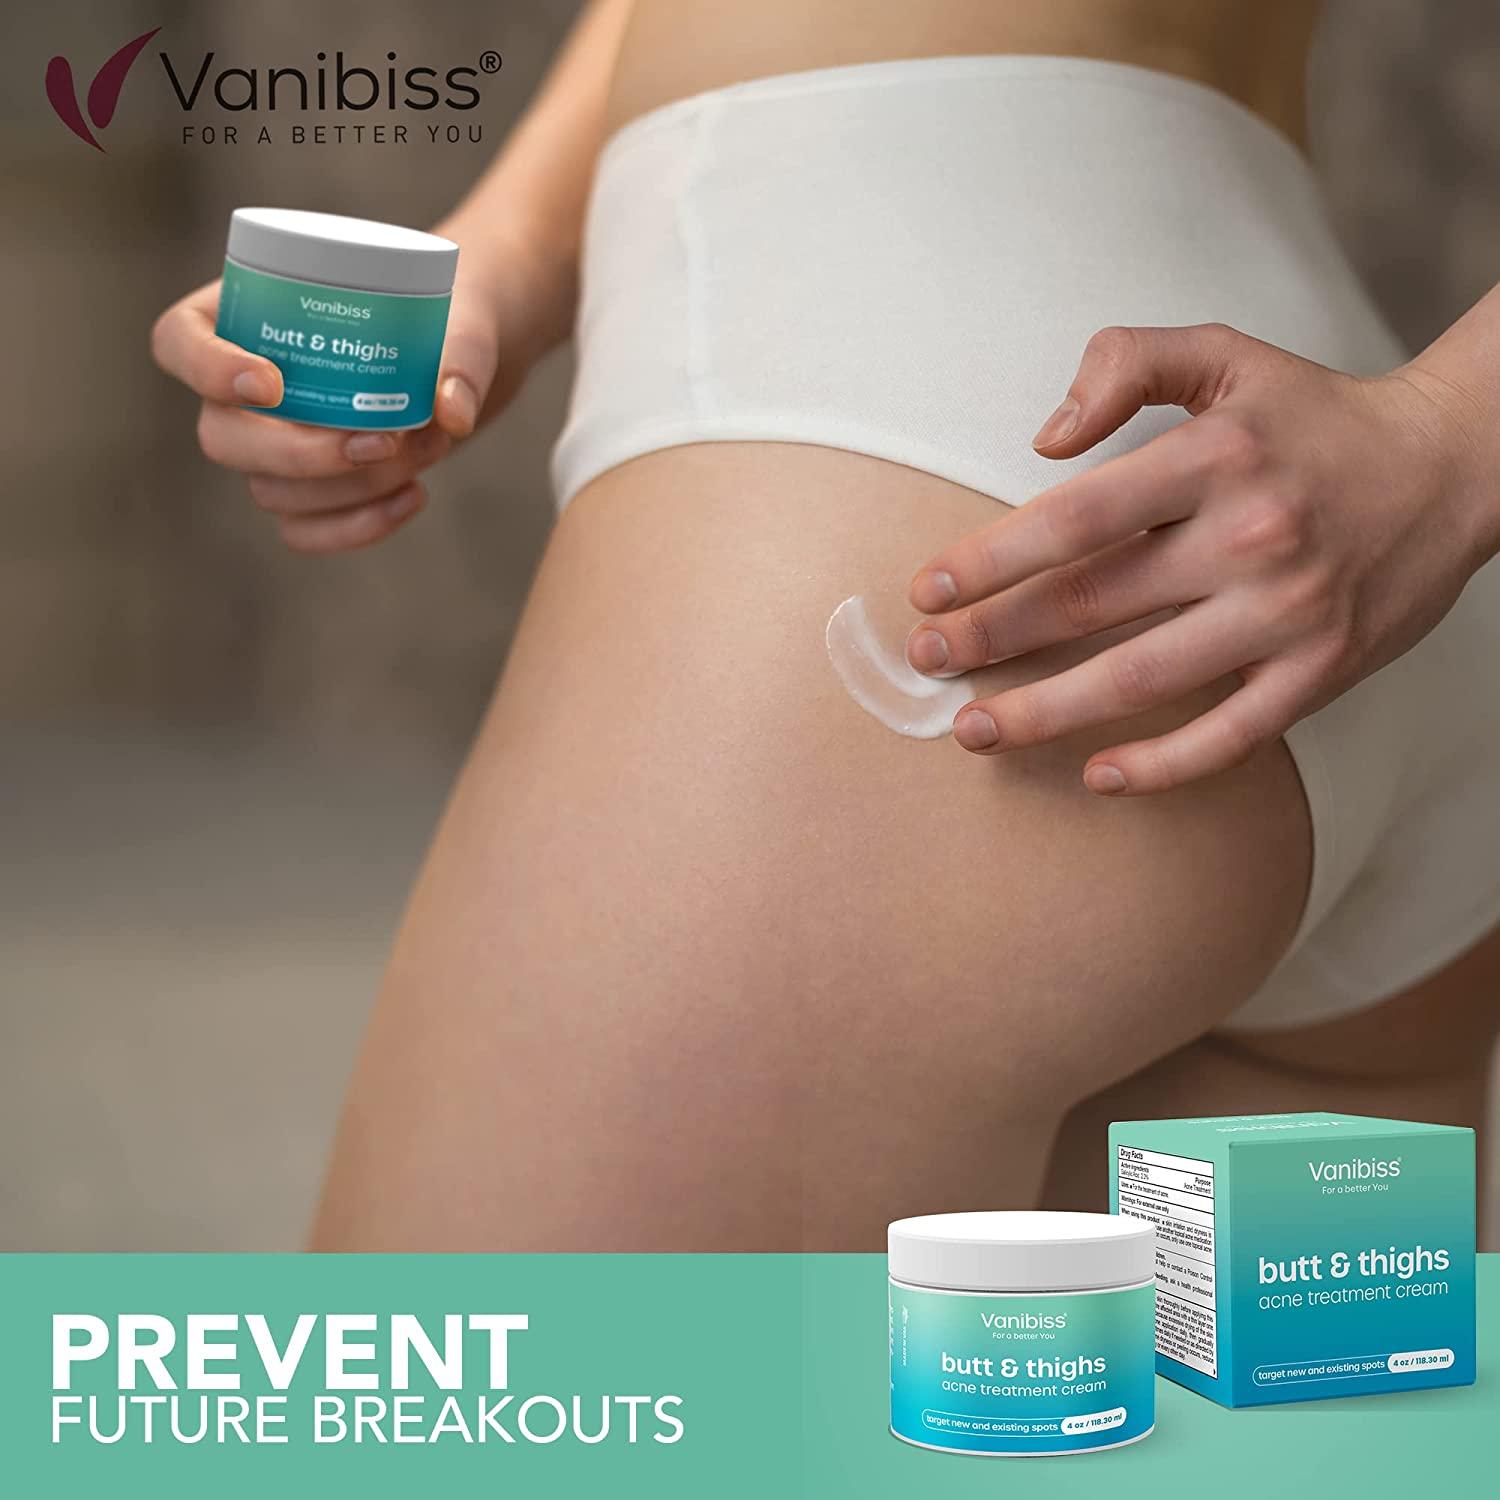 Vanibiss Butt & Thighs Acne Treatment Cream - Butt Acne Clearing Cream for  Pimples, Zits, Razor Bumps, Dark Spots - Acne Clearing Lotion for Buttocks  & Body - Inner Thigh Blackhead Remover (4oz)